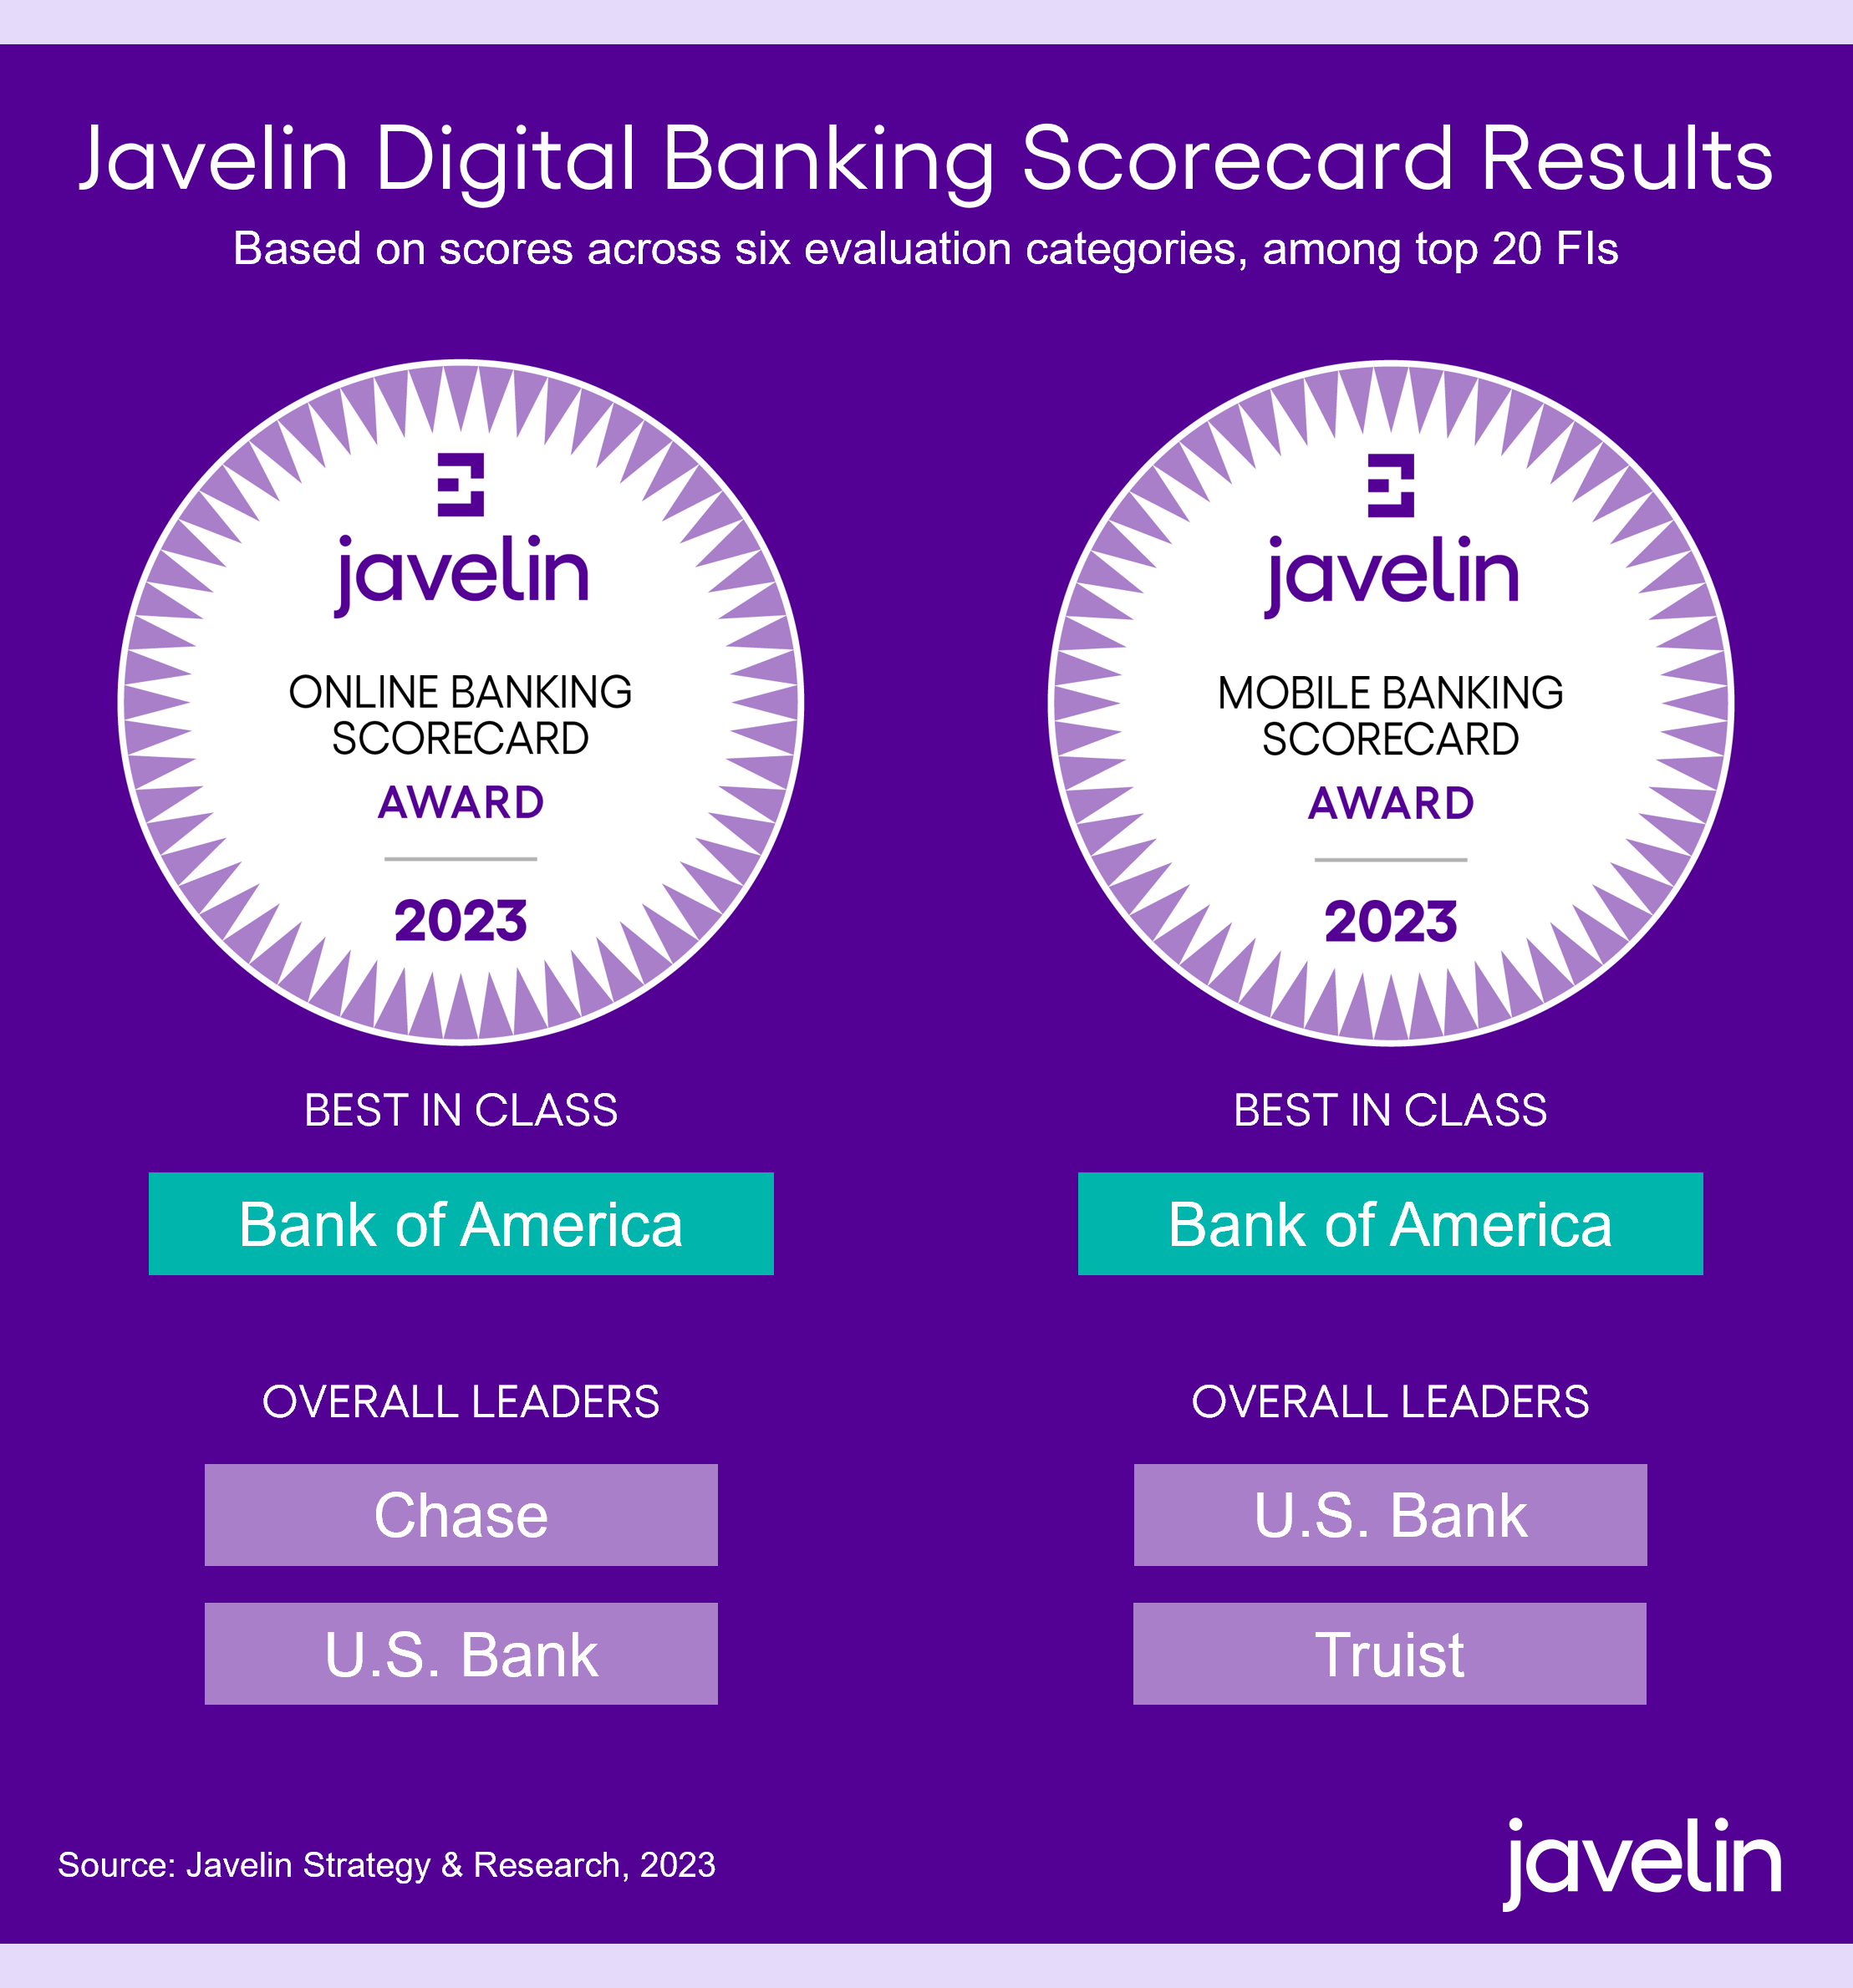 Leading Banks Are Prioritizing Digital Banking Engagement to Deepen ‘Log In, Log Out’ Relationships thumbnail